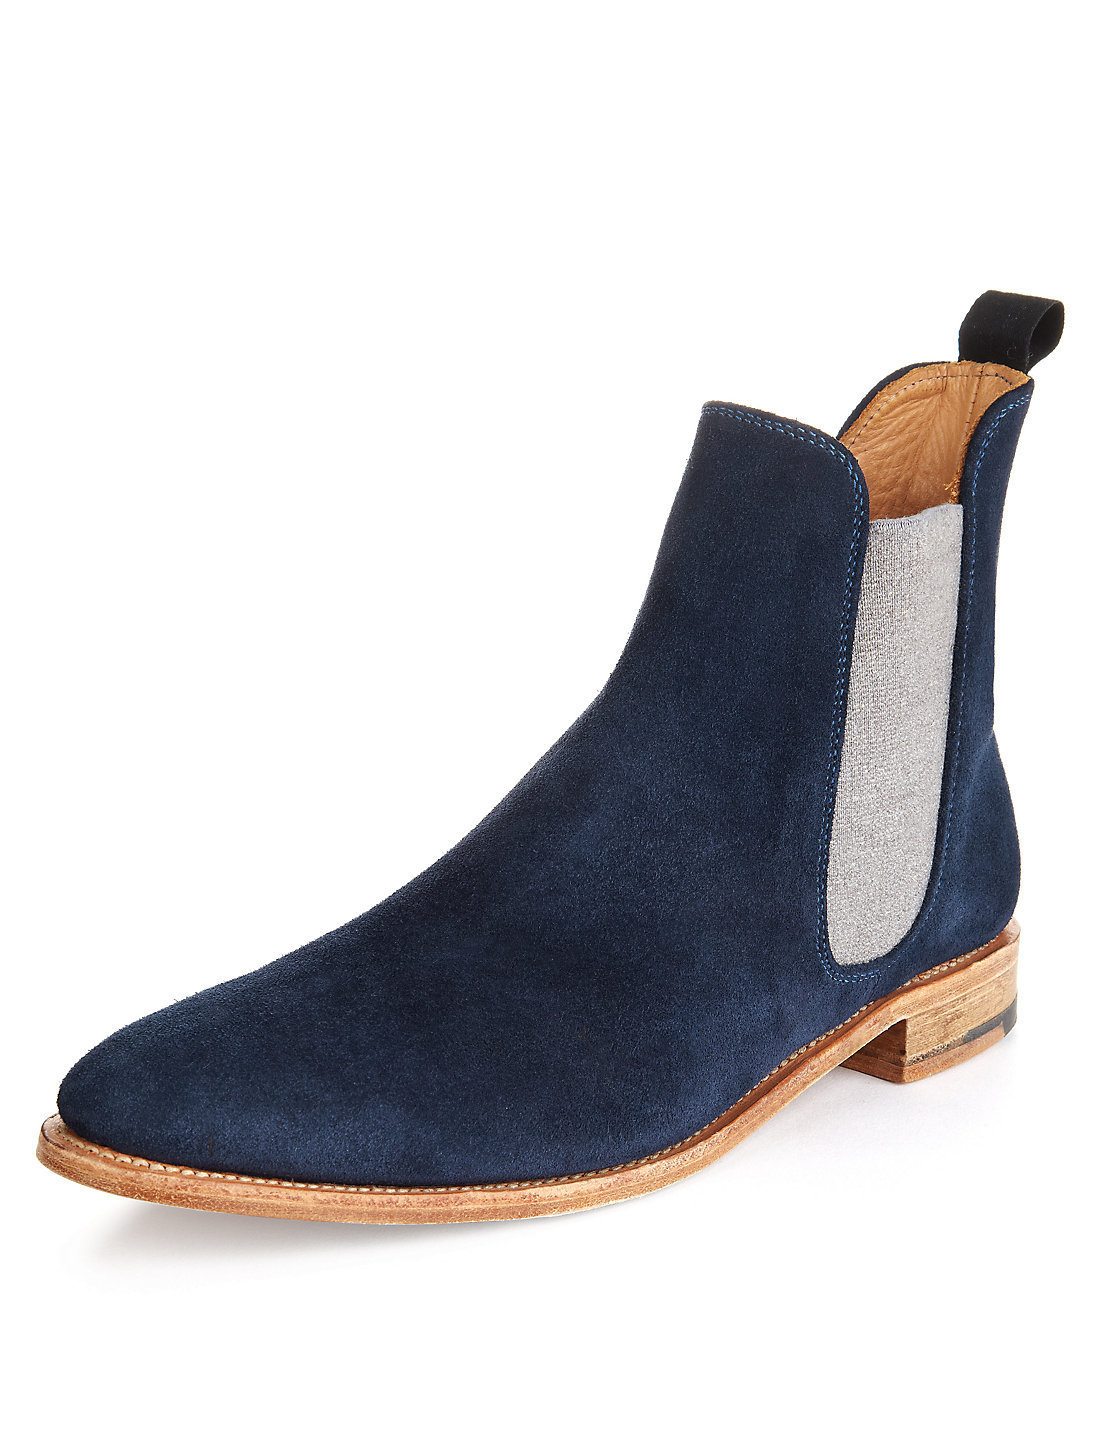 NEW Handmade mens chelsea boots, Men Fashion blue ankle-high suede leather boot